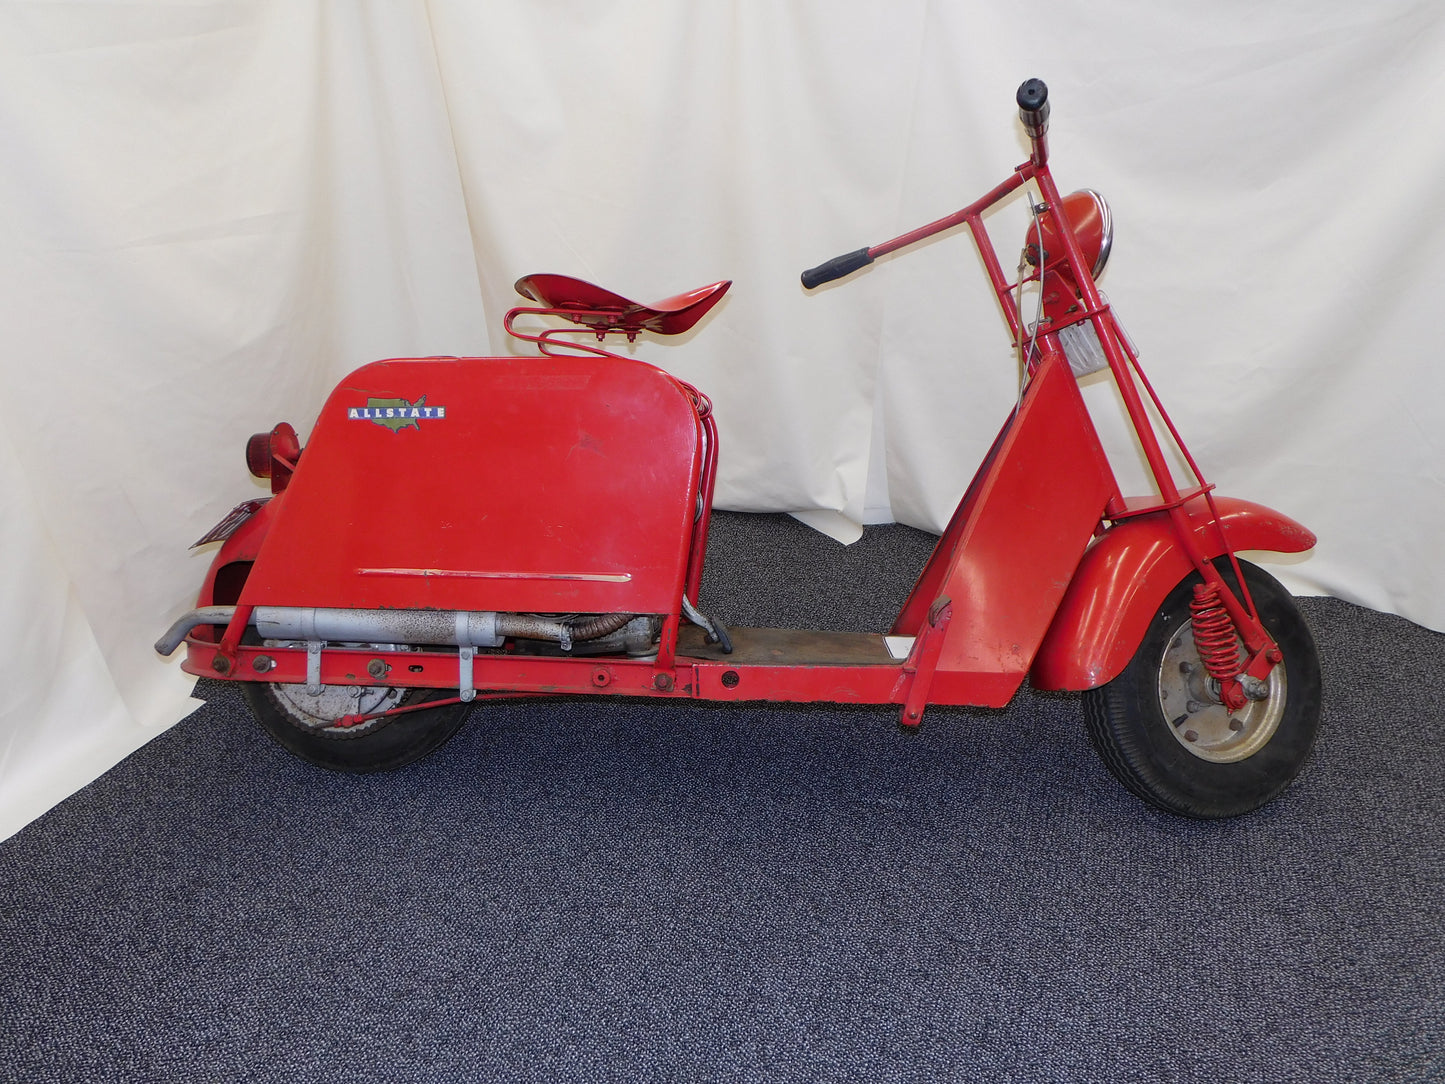 1952 Allstate Scooter